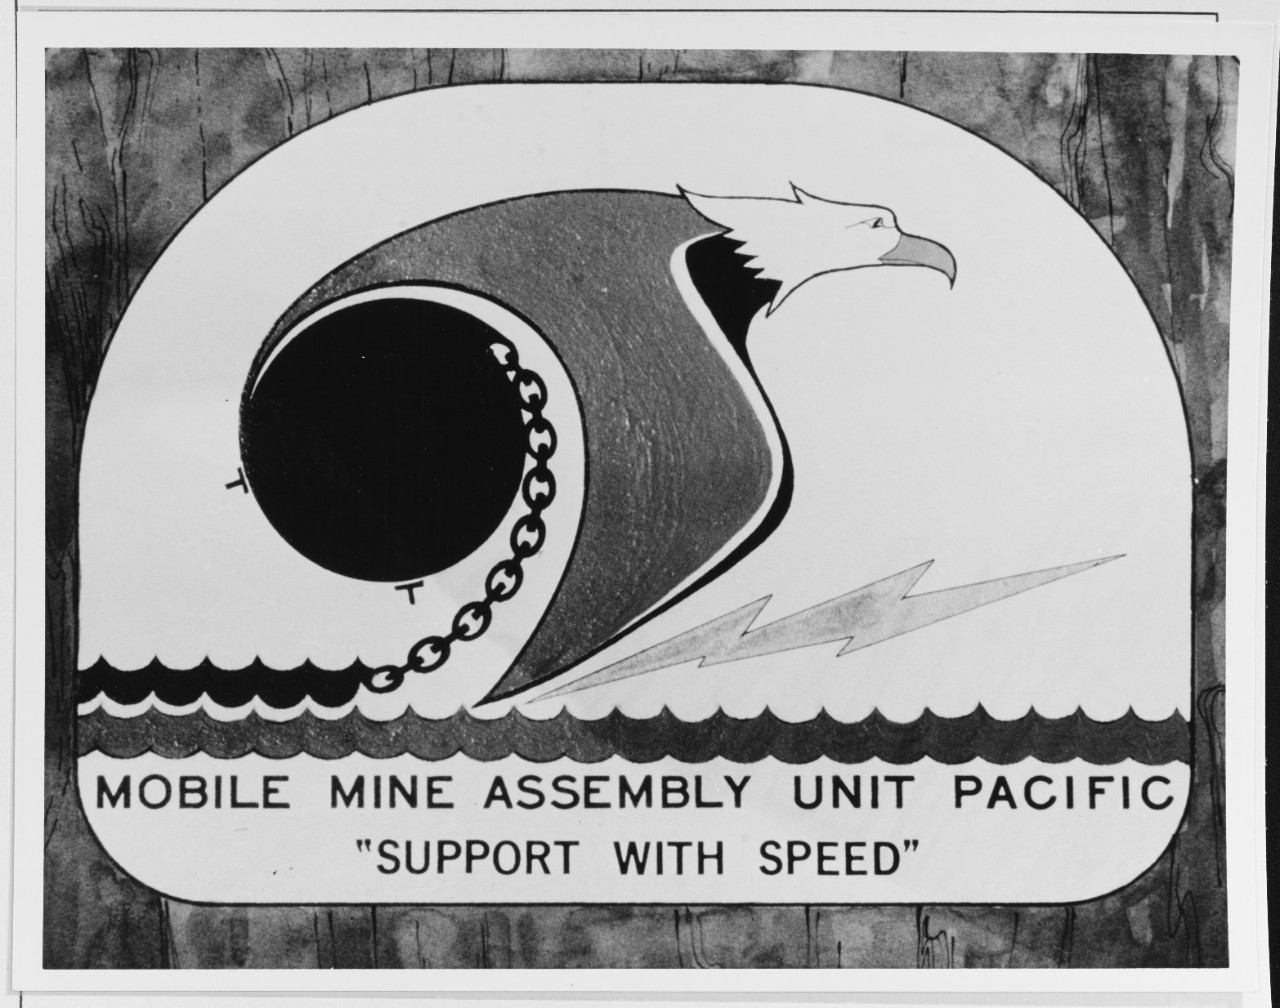 Insignia: Mobile Mine Assembly Unit Pacific